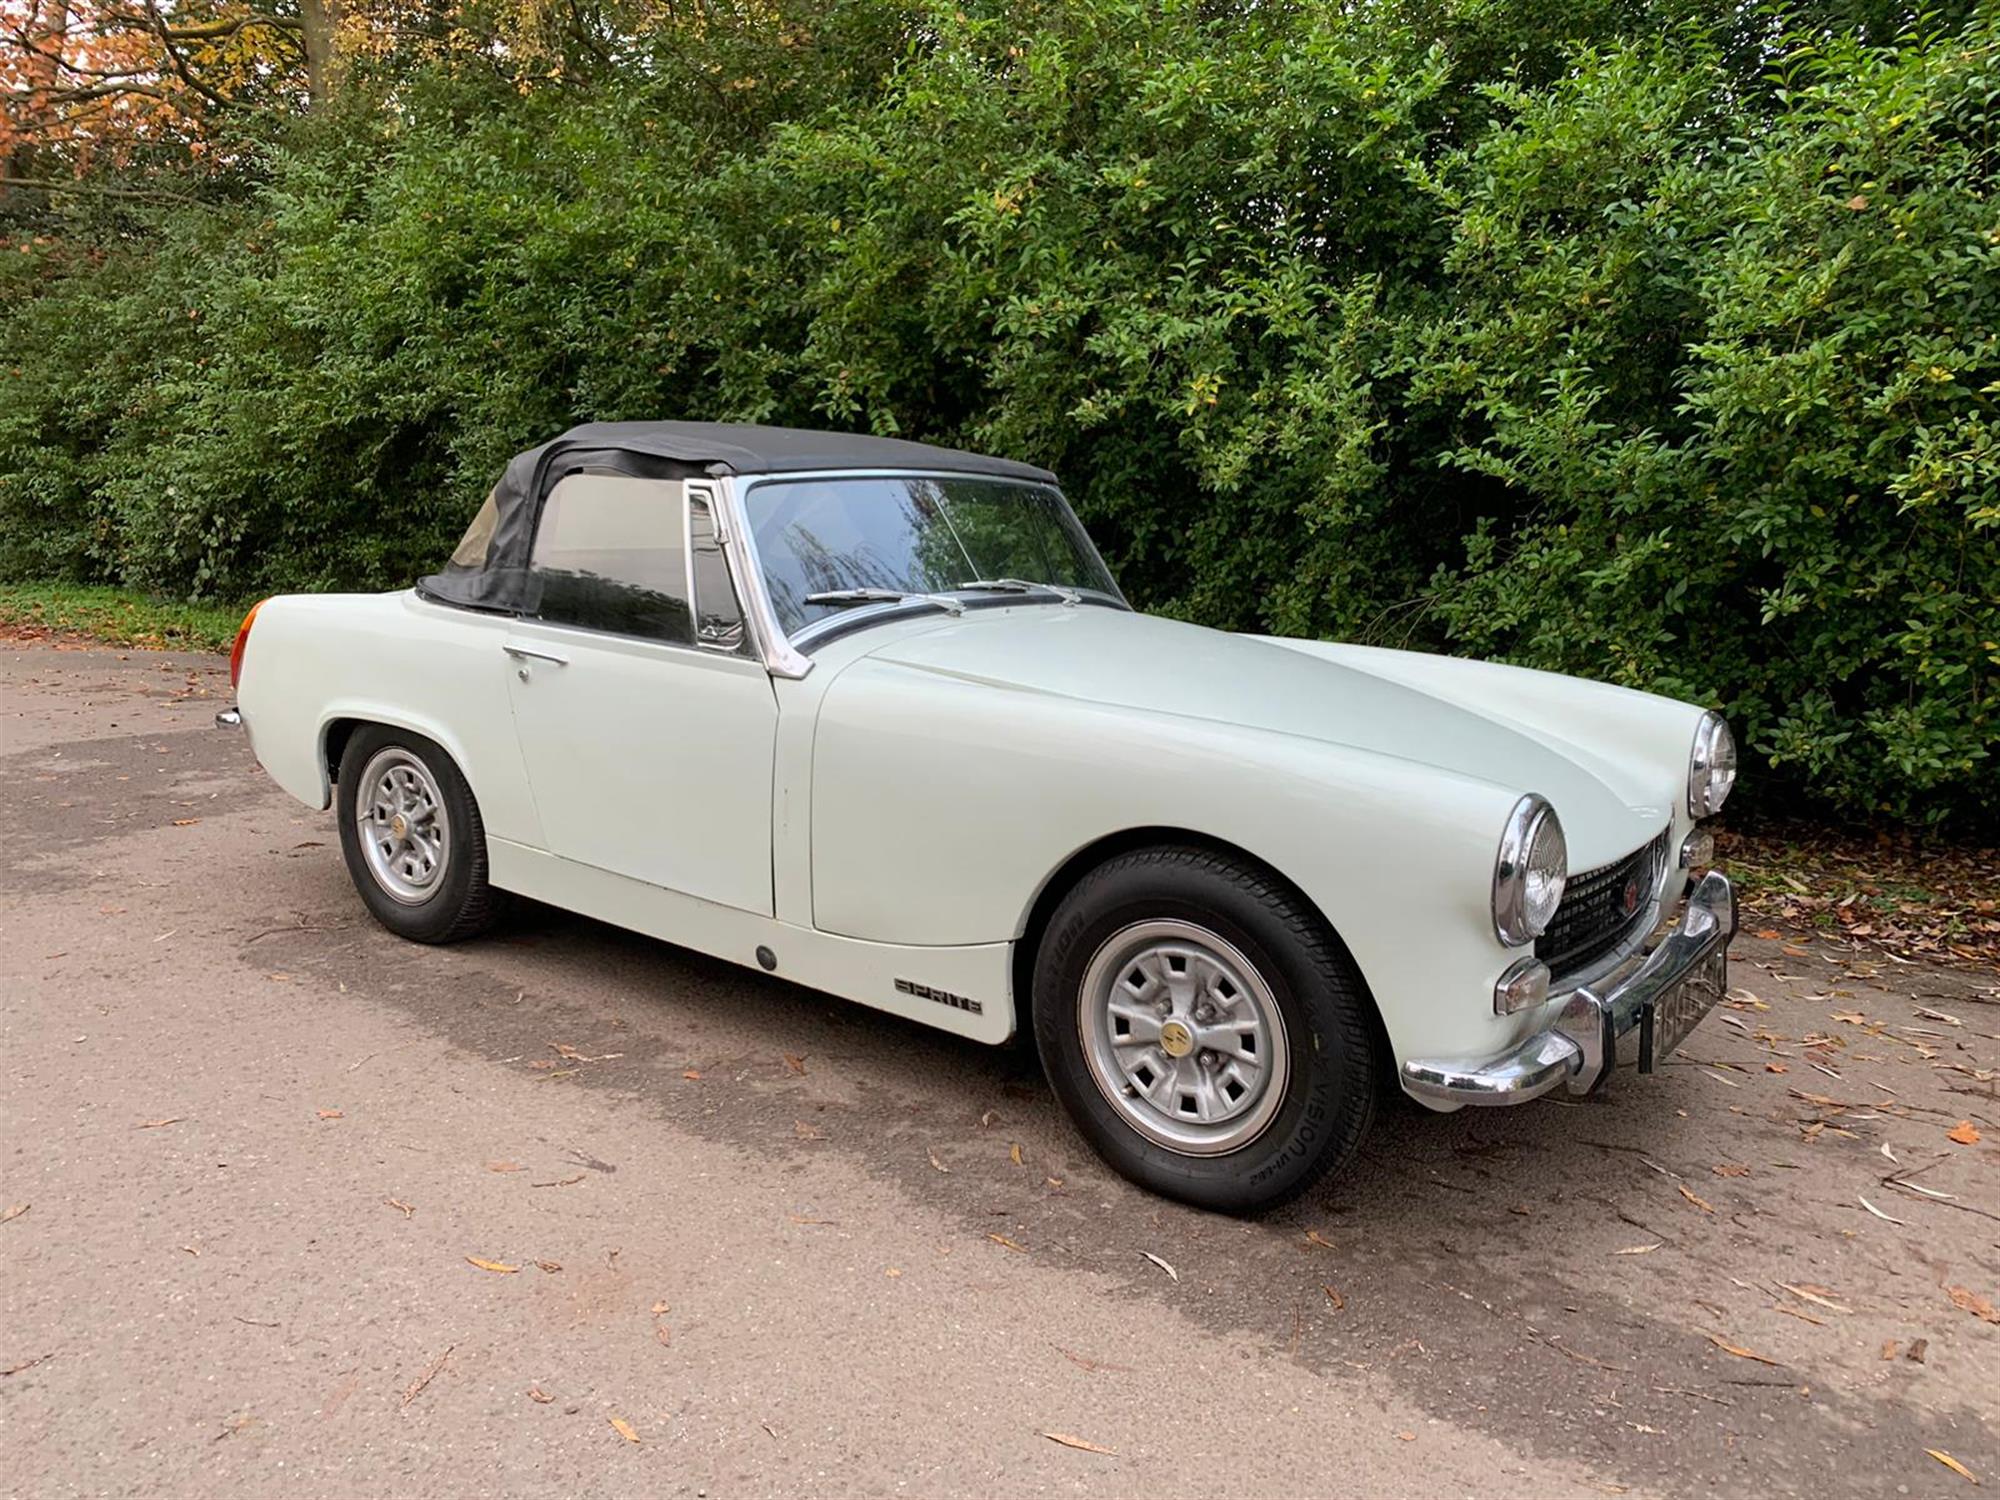 Austin Healey Sprite MkIV 1970 (H registration), one of only 1,411 of this style with rear quarter